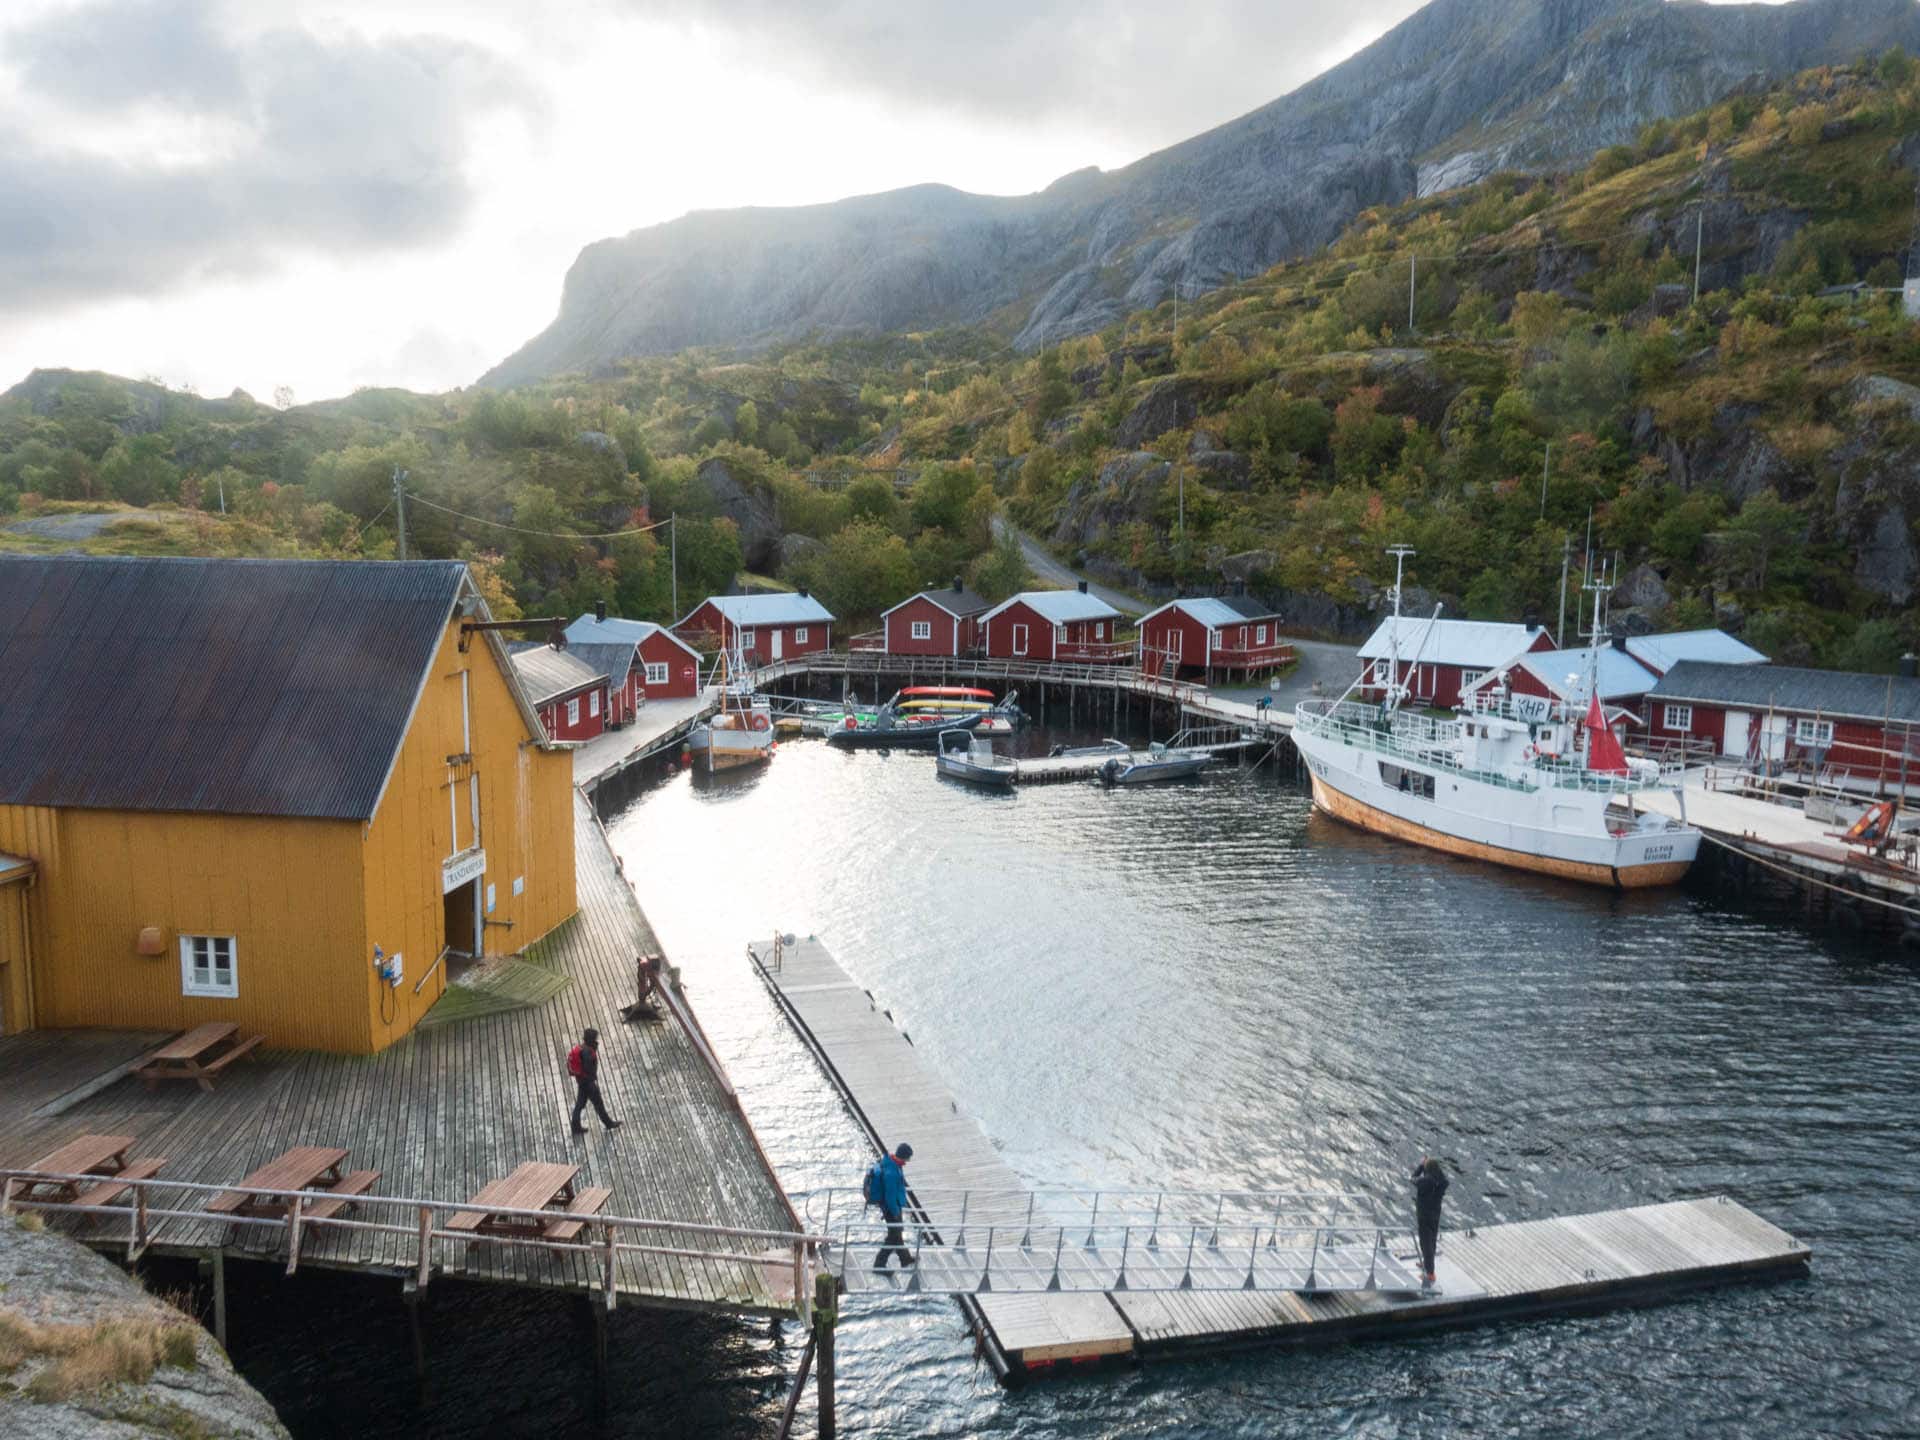 Nusfjord, among the ten most beautiful spots in Norway